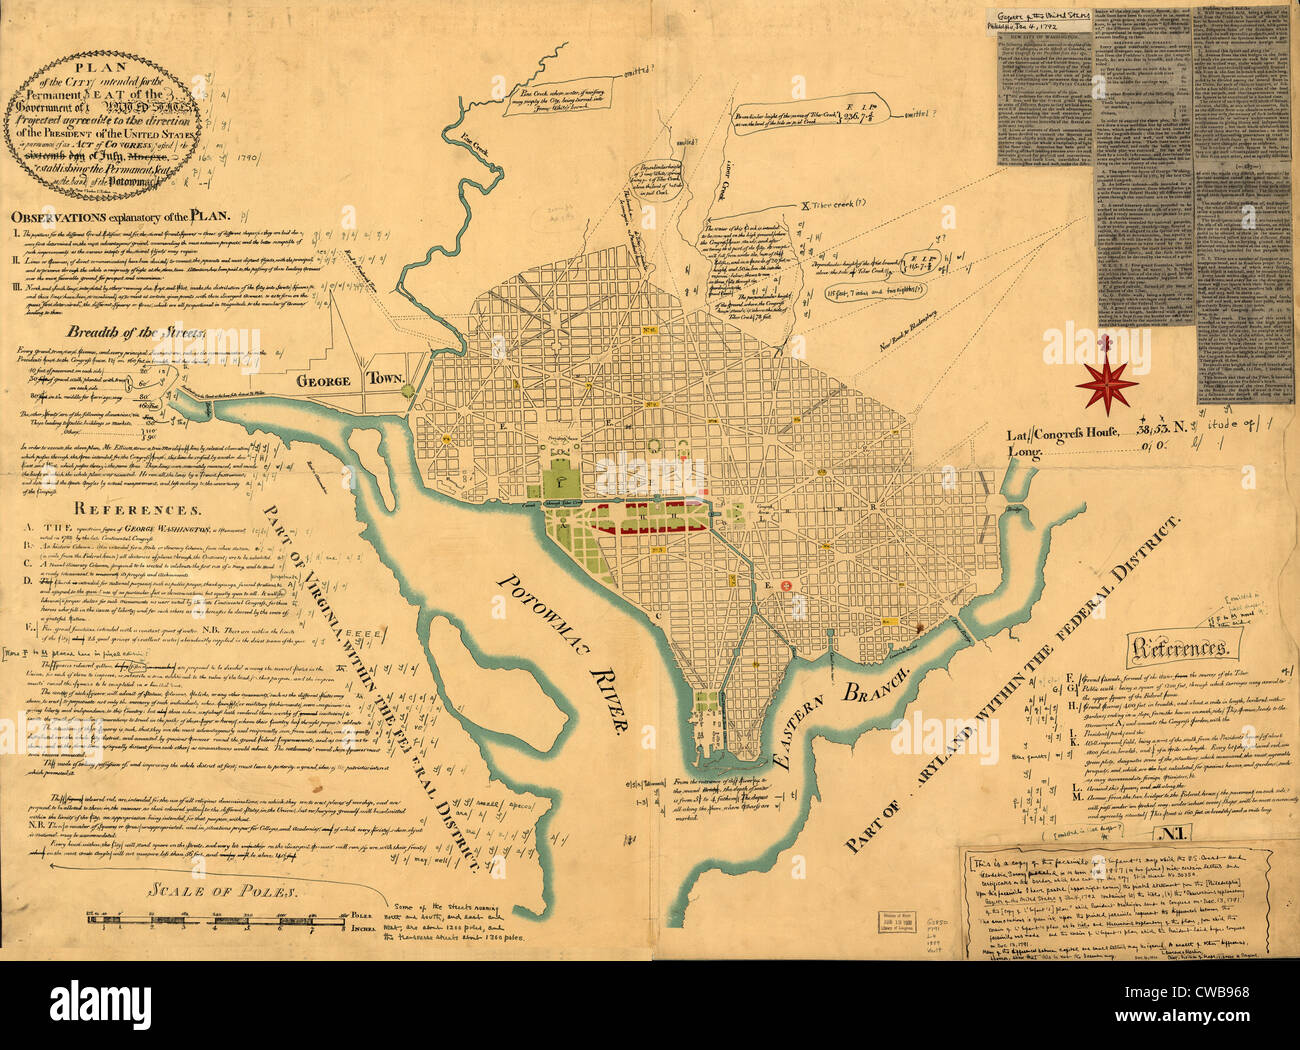 Washington, D.C. Map showing the original plan of what would become the District of Columbia. By Peter Charles L'Enfant. 1791 Stock Photo